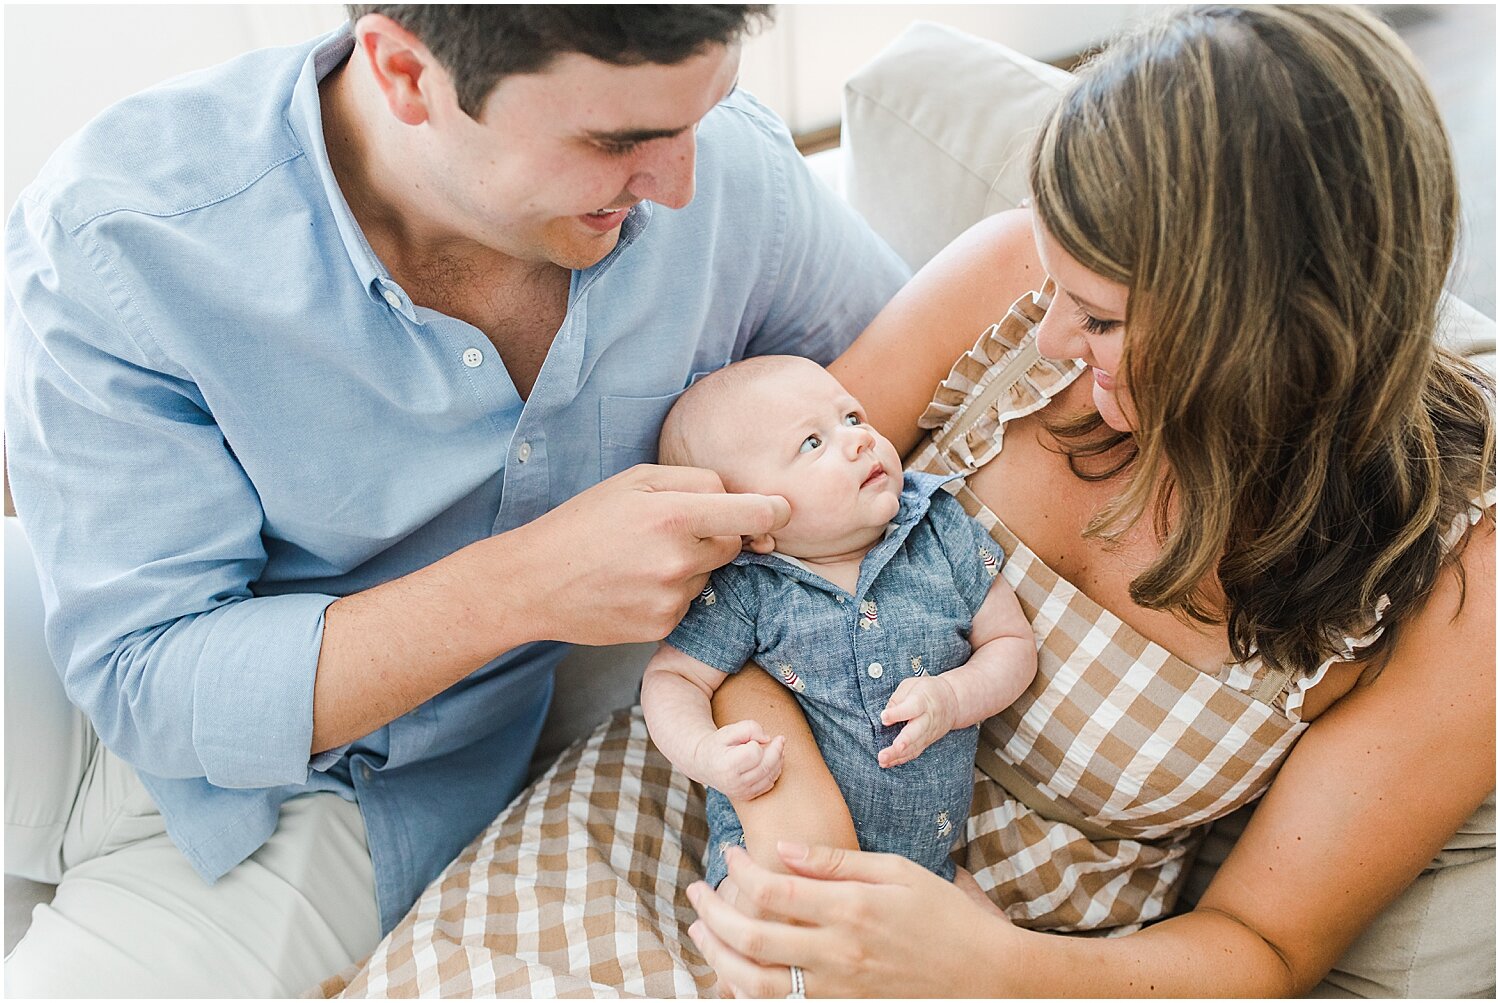 Lifestyle newborn session at 3 months in New Canaan, CT | Kristin Wood Photography